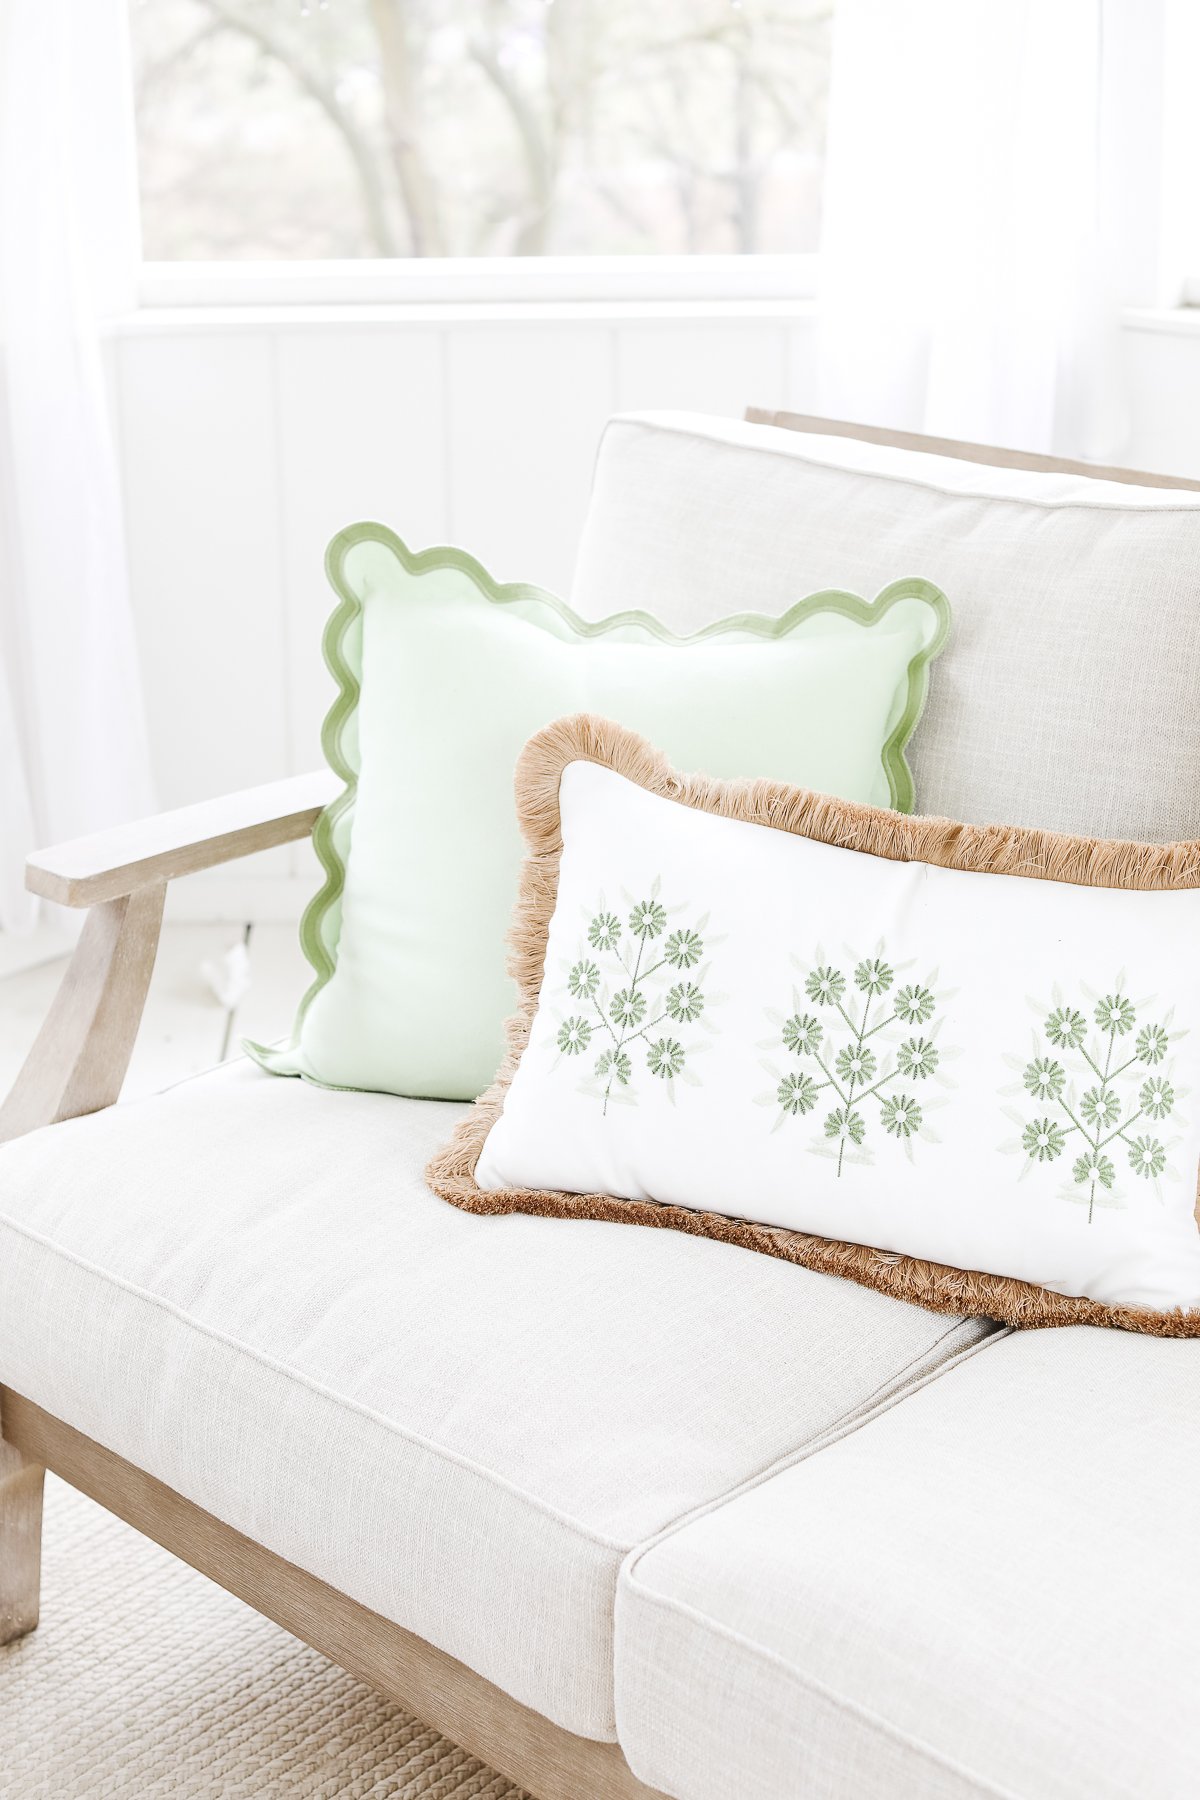 A bright and cozy corner with a beige cushioned bench, decorated with outdoor pillows: one green scalloped-edge pillow and one white pillow with green botanical print.